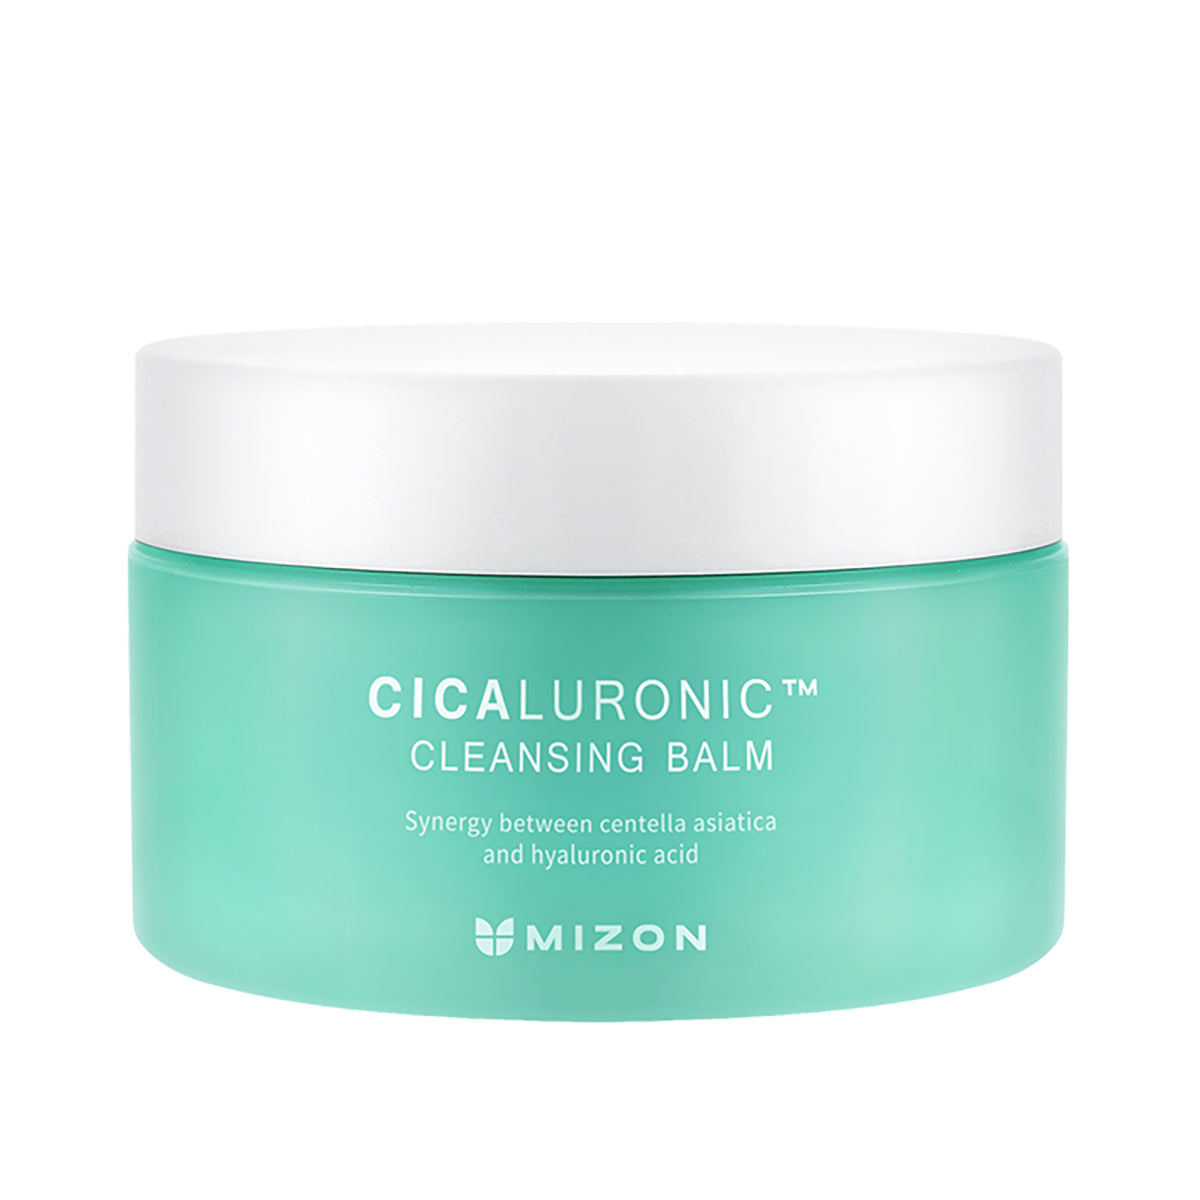 Cicaluronic Cleansing Balm